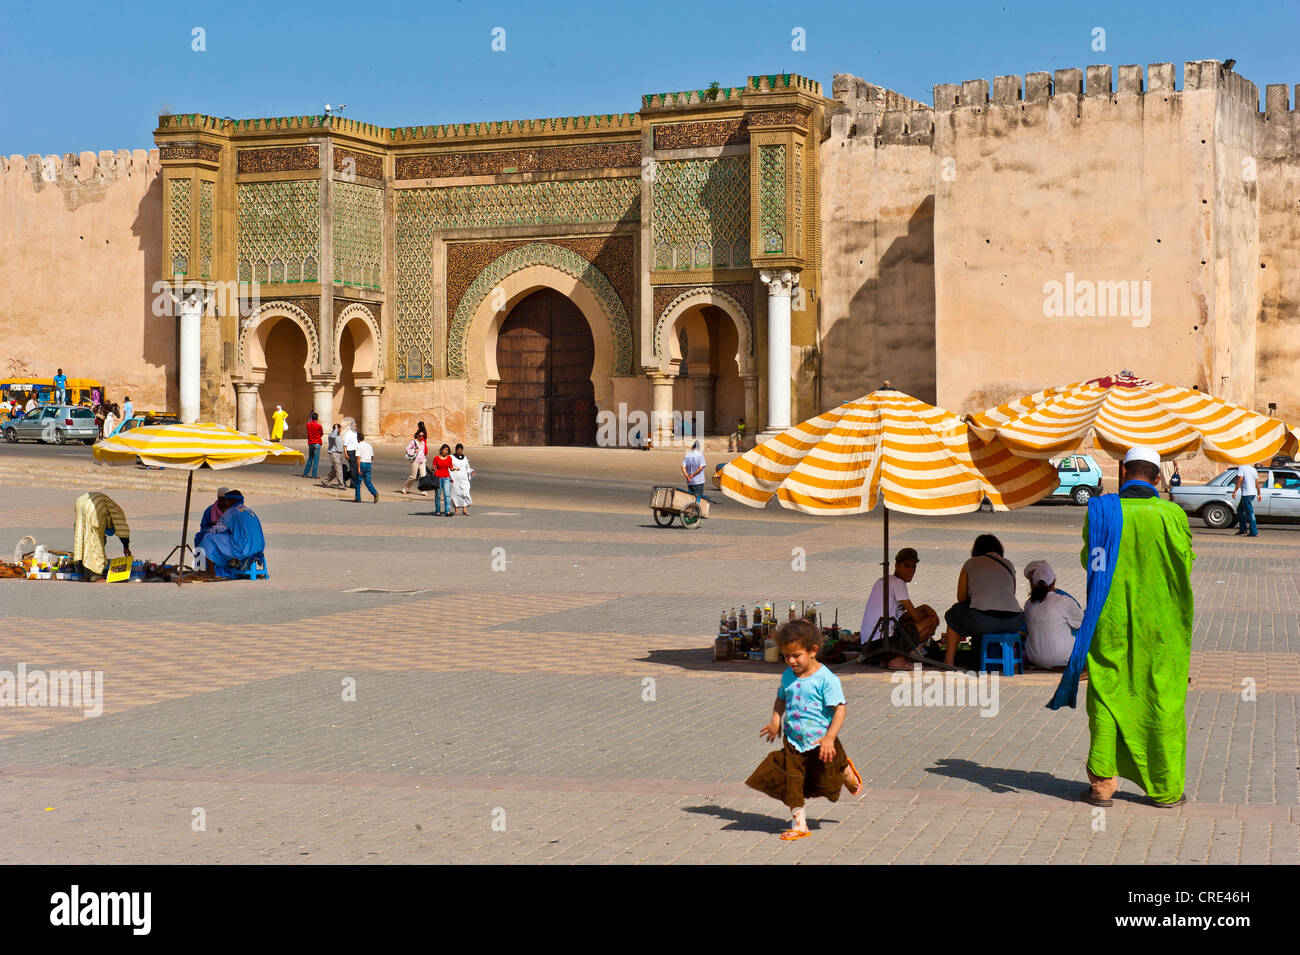 Old town gate, Bab Mansour, on the forecourt where vendors have spread out their wares for sale under umbrellas, Meknes, Morocco Stock Photo